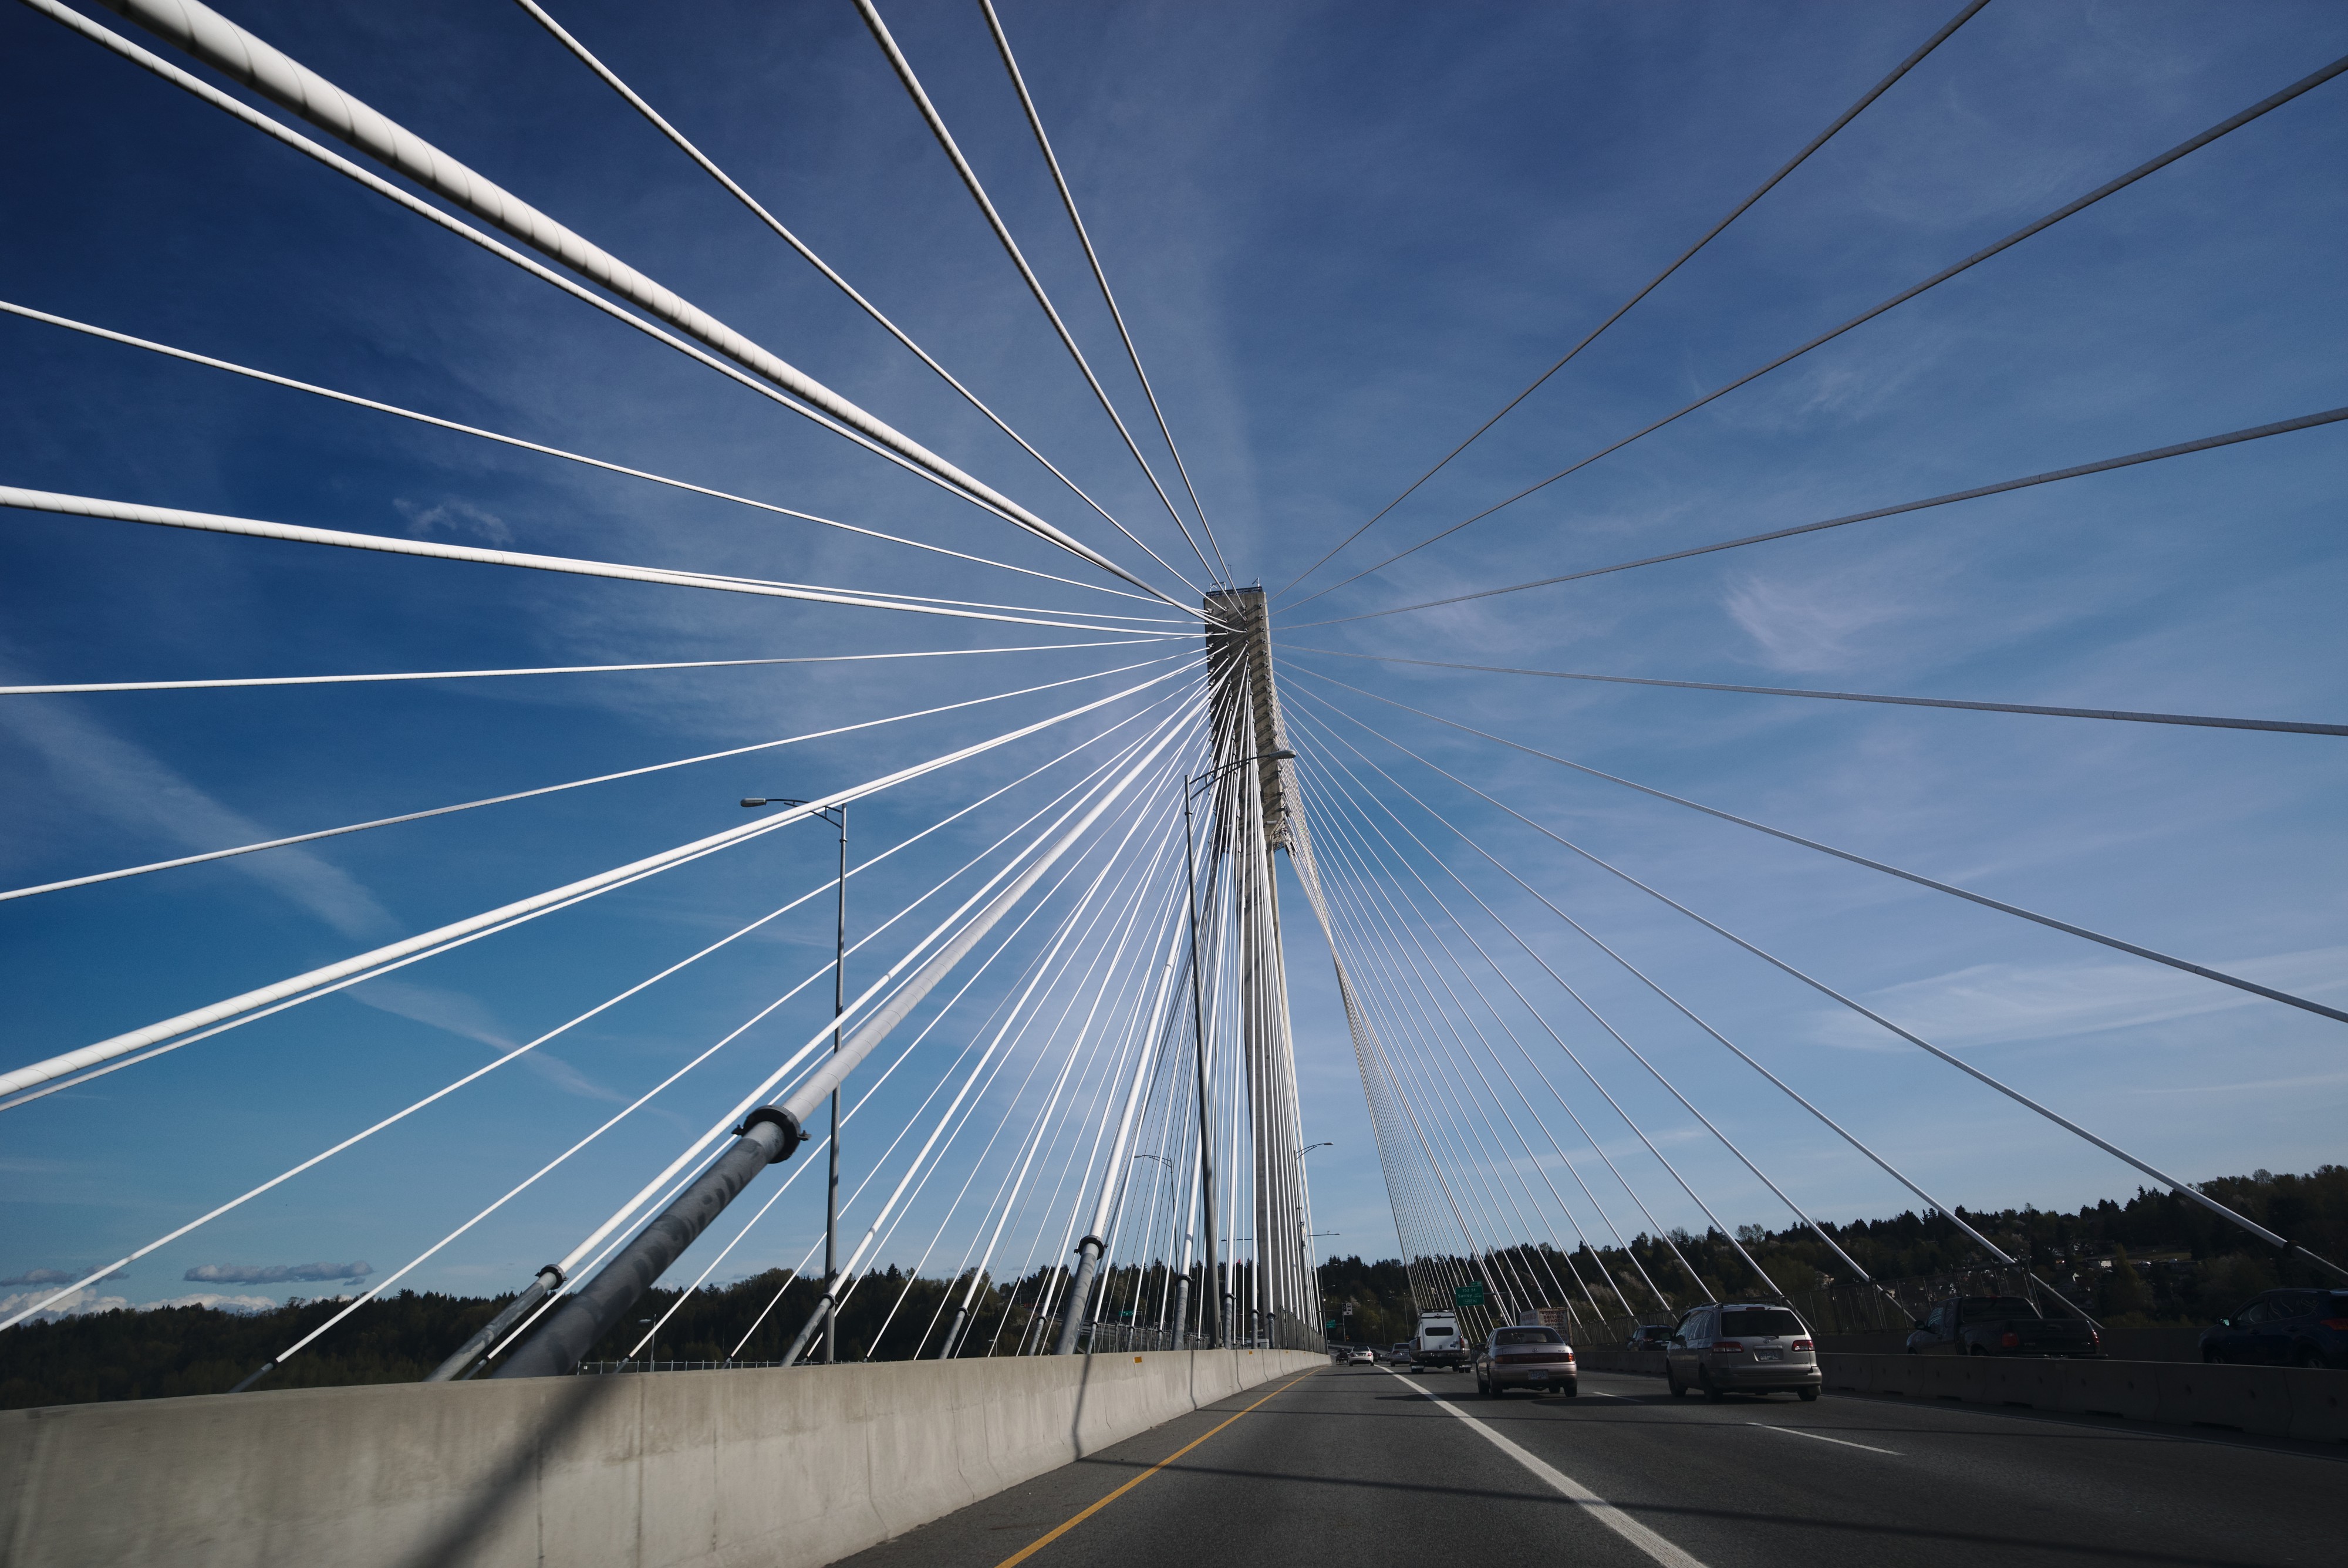 Looking up while driving over the Port Mann Bridge